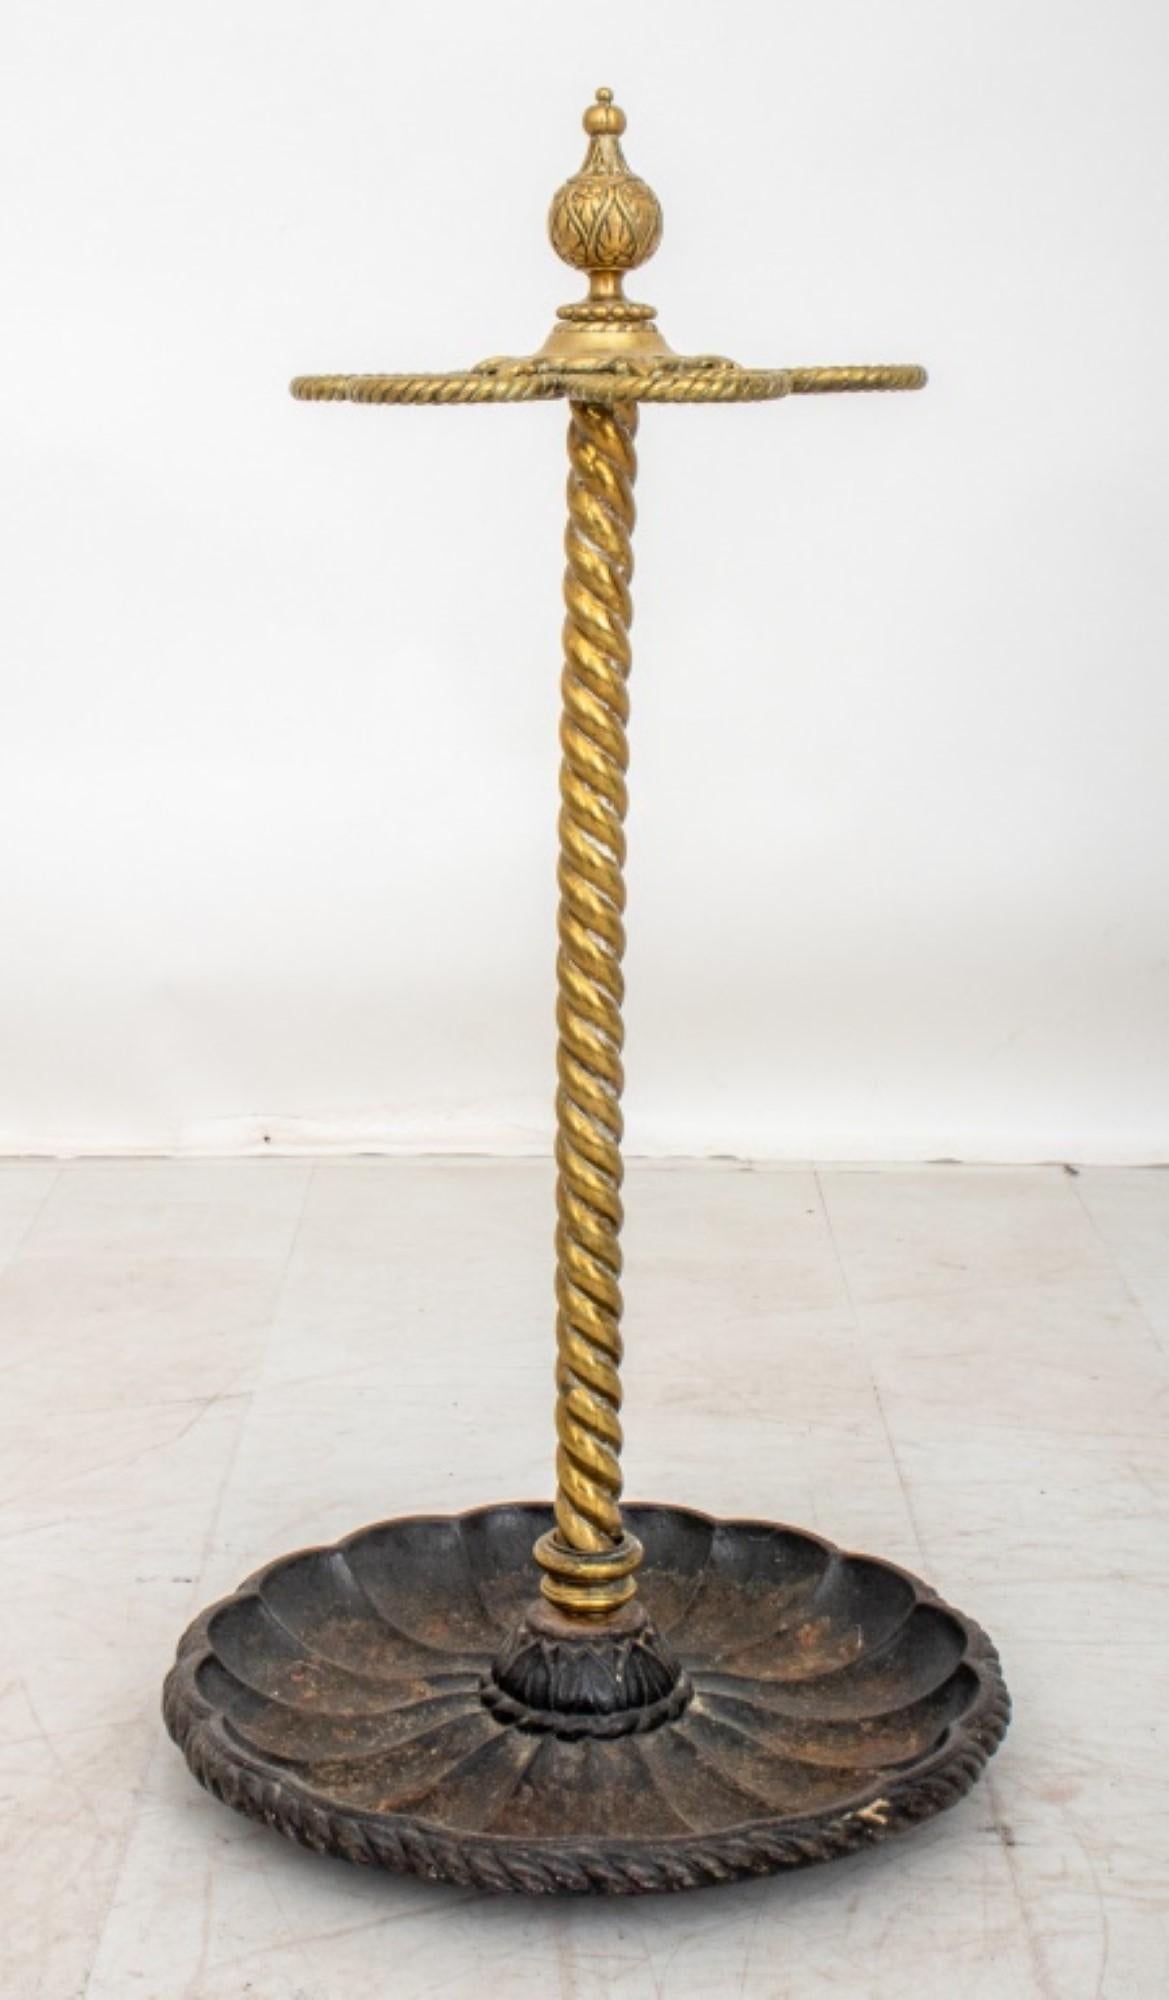 The Edwardian Brass & Cast Iron Stick & Umbrella Stand, dating from circa 1900,
Has approximate dimensions of 30 inches in height and 15 inches in diameter.
 This piece serves the purpose of a cane, stick, or umbrella stand, showcasing